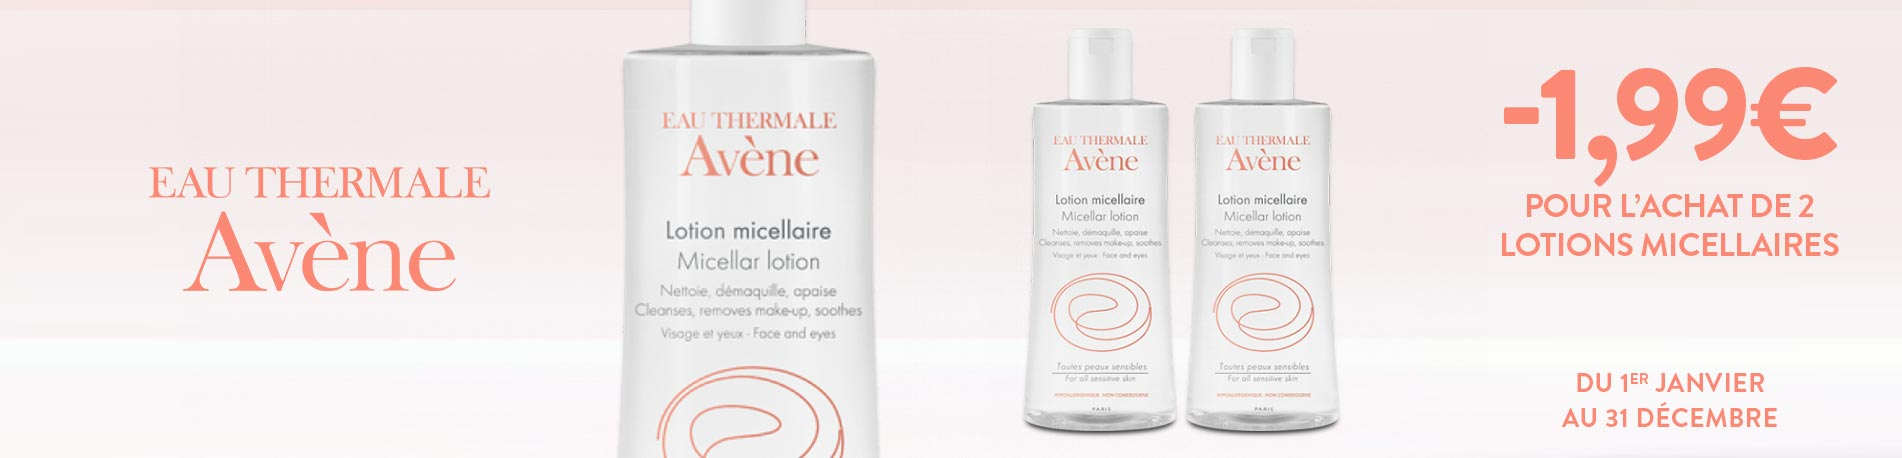 Promotion Avène lotion micellaire